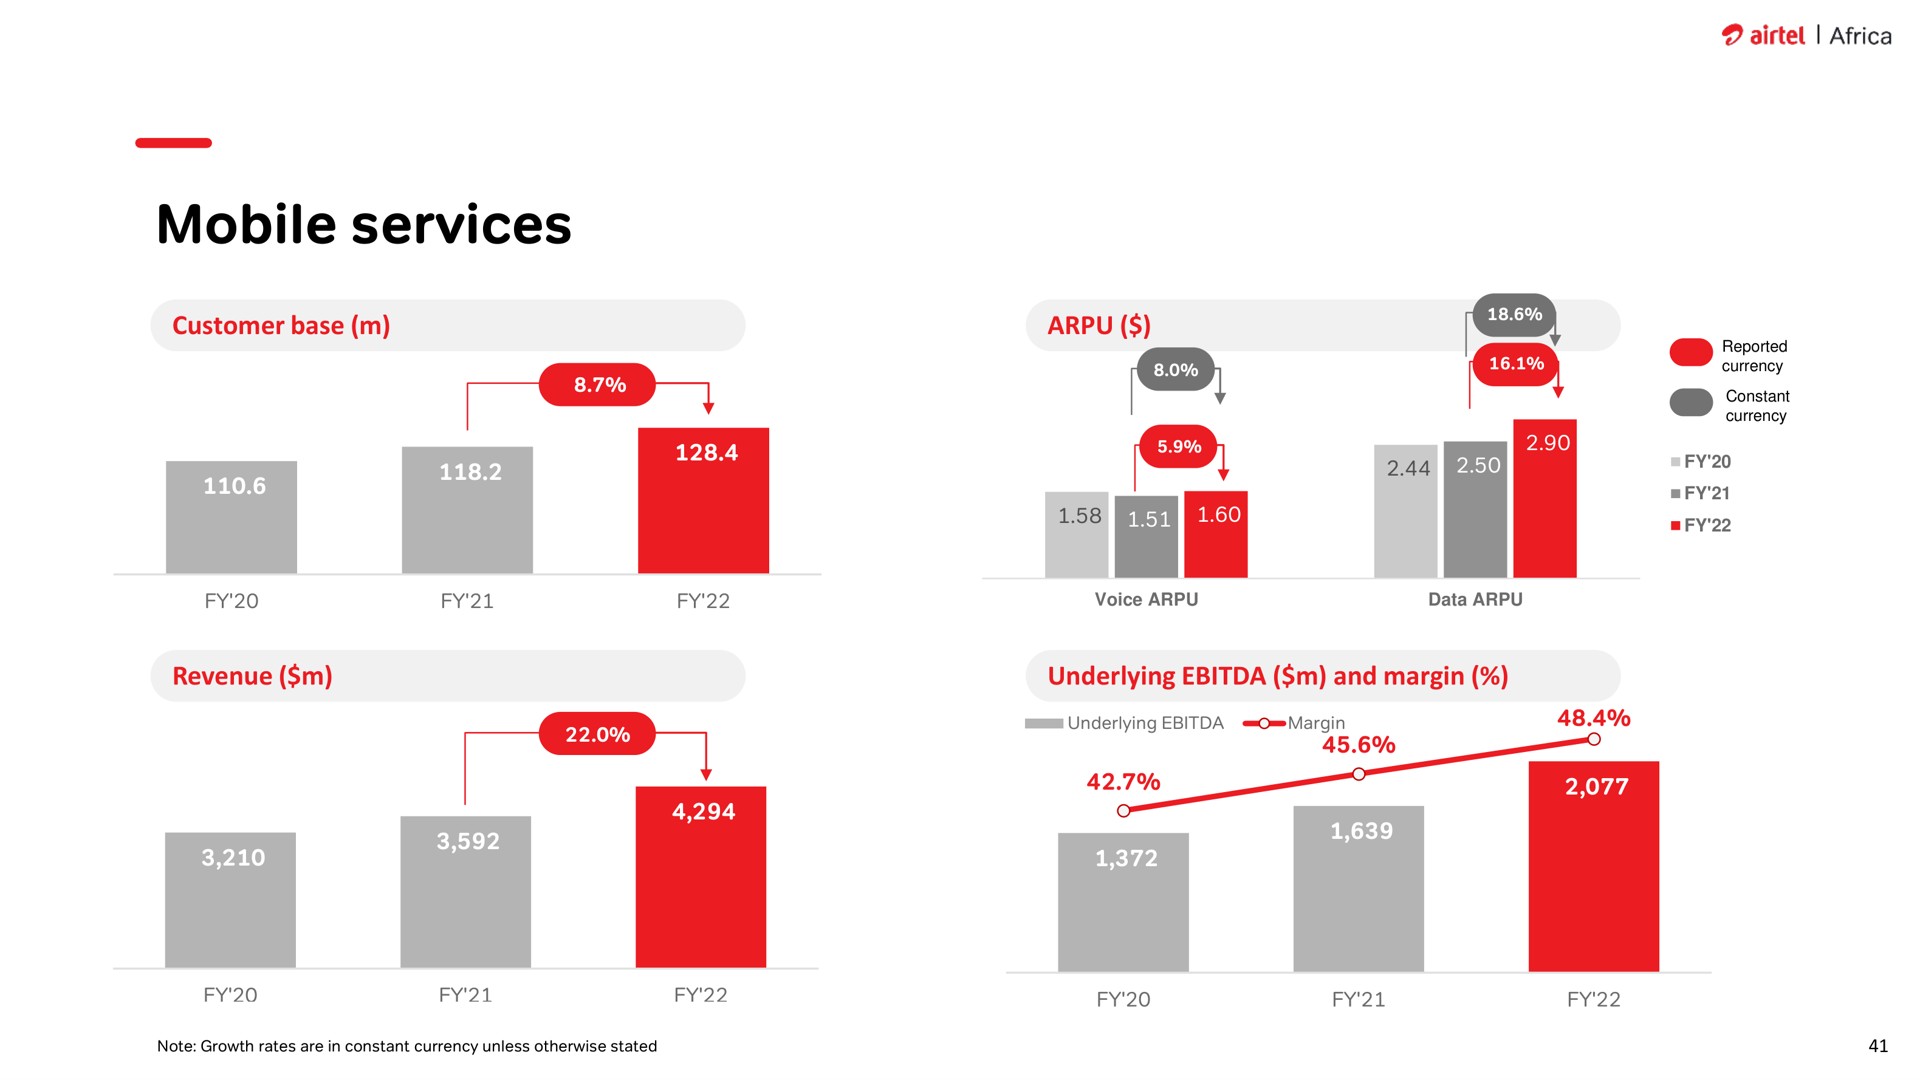 mobile services | Airtel Africa